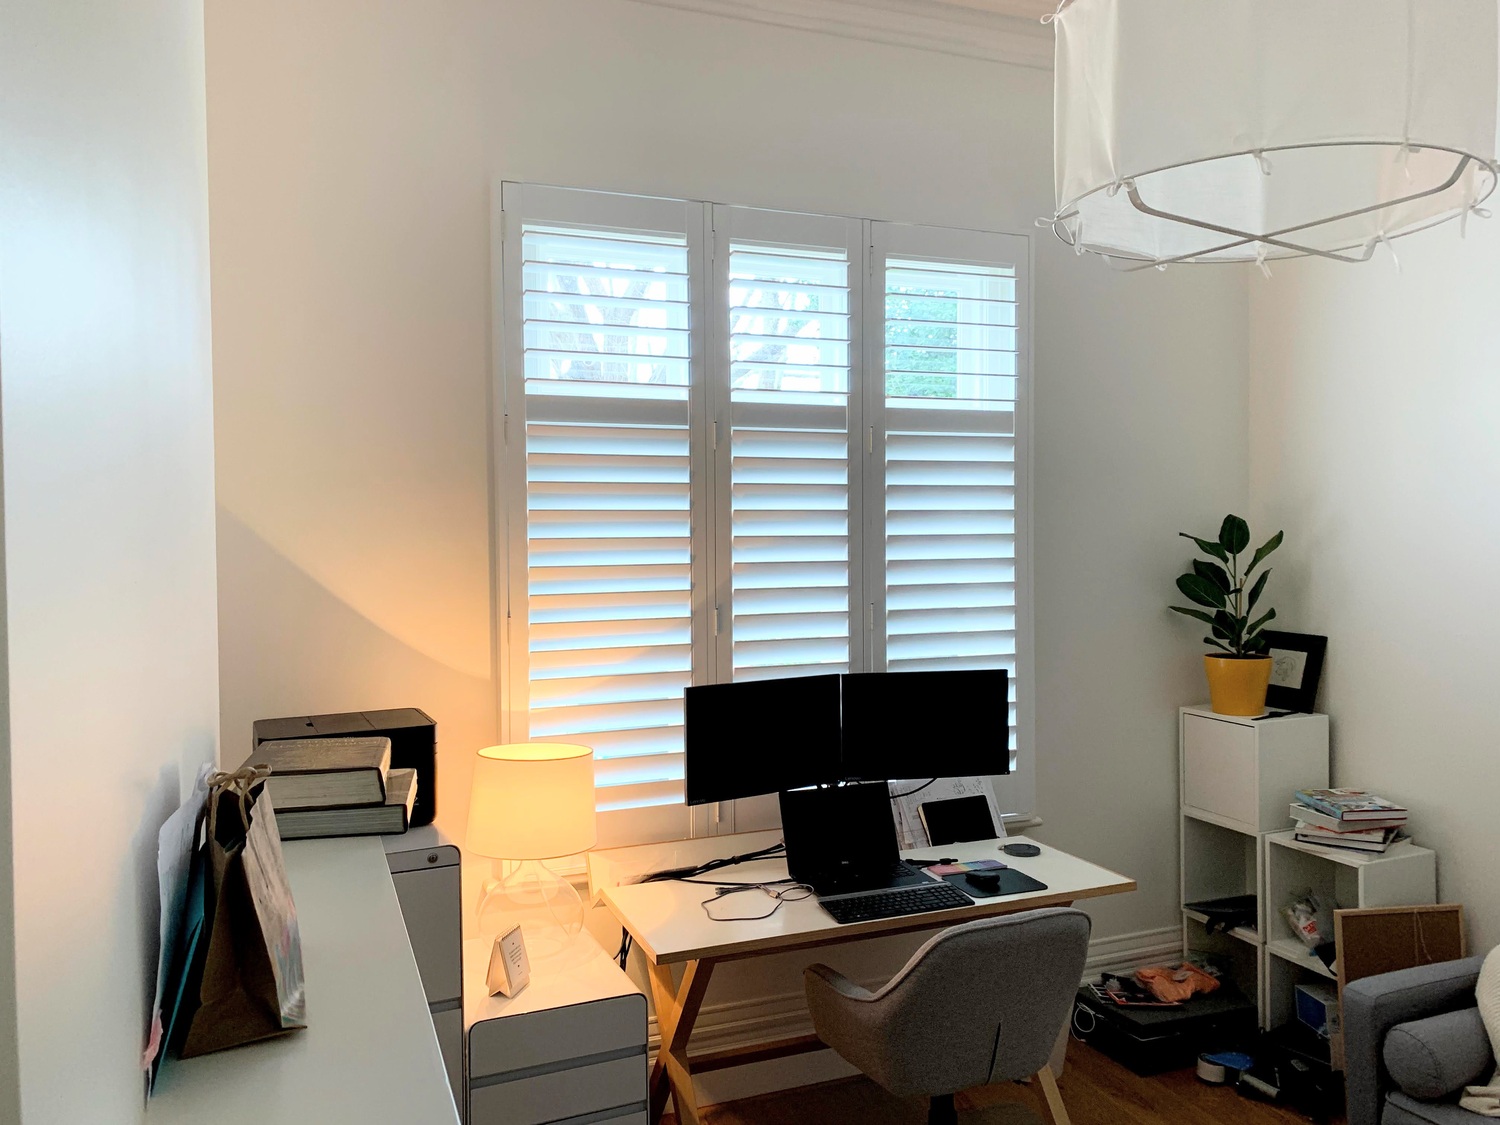 <span style="font-weight: bold;">Plantation Shutters</span>